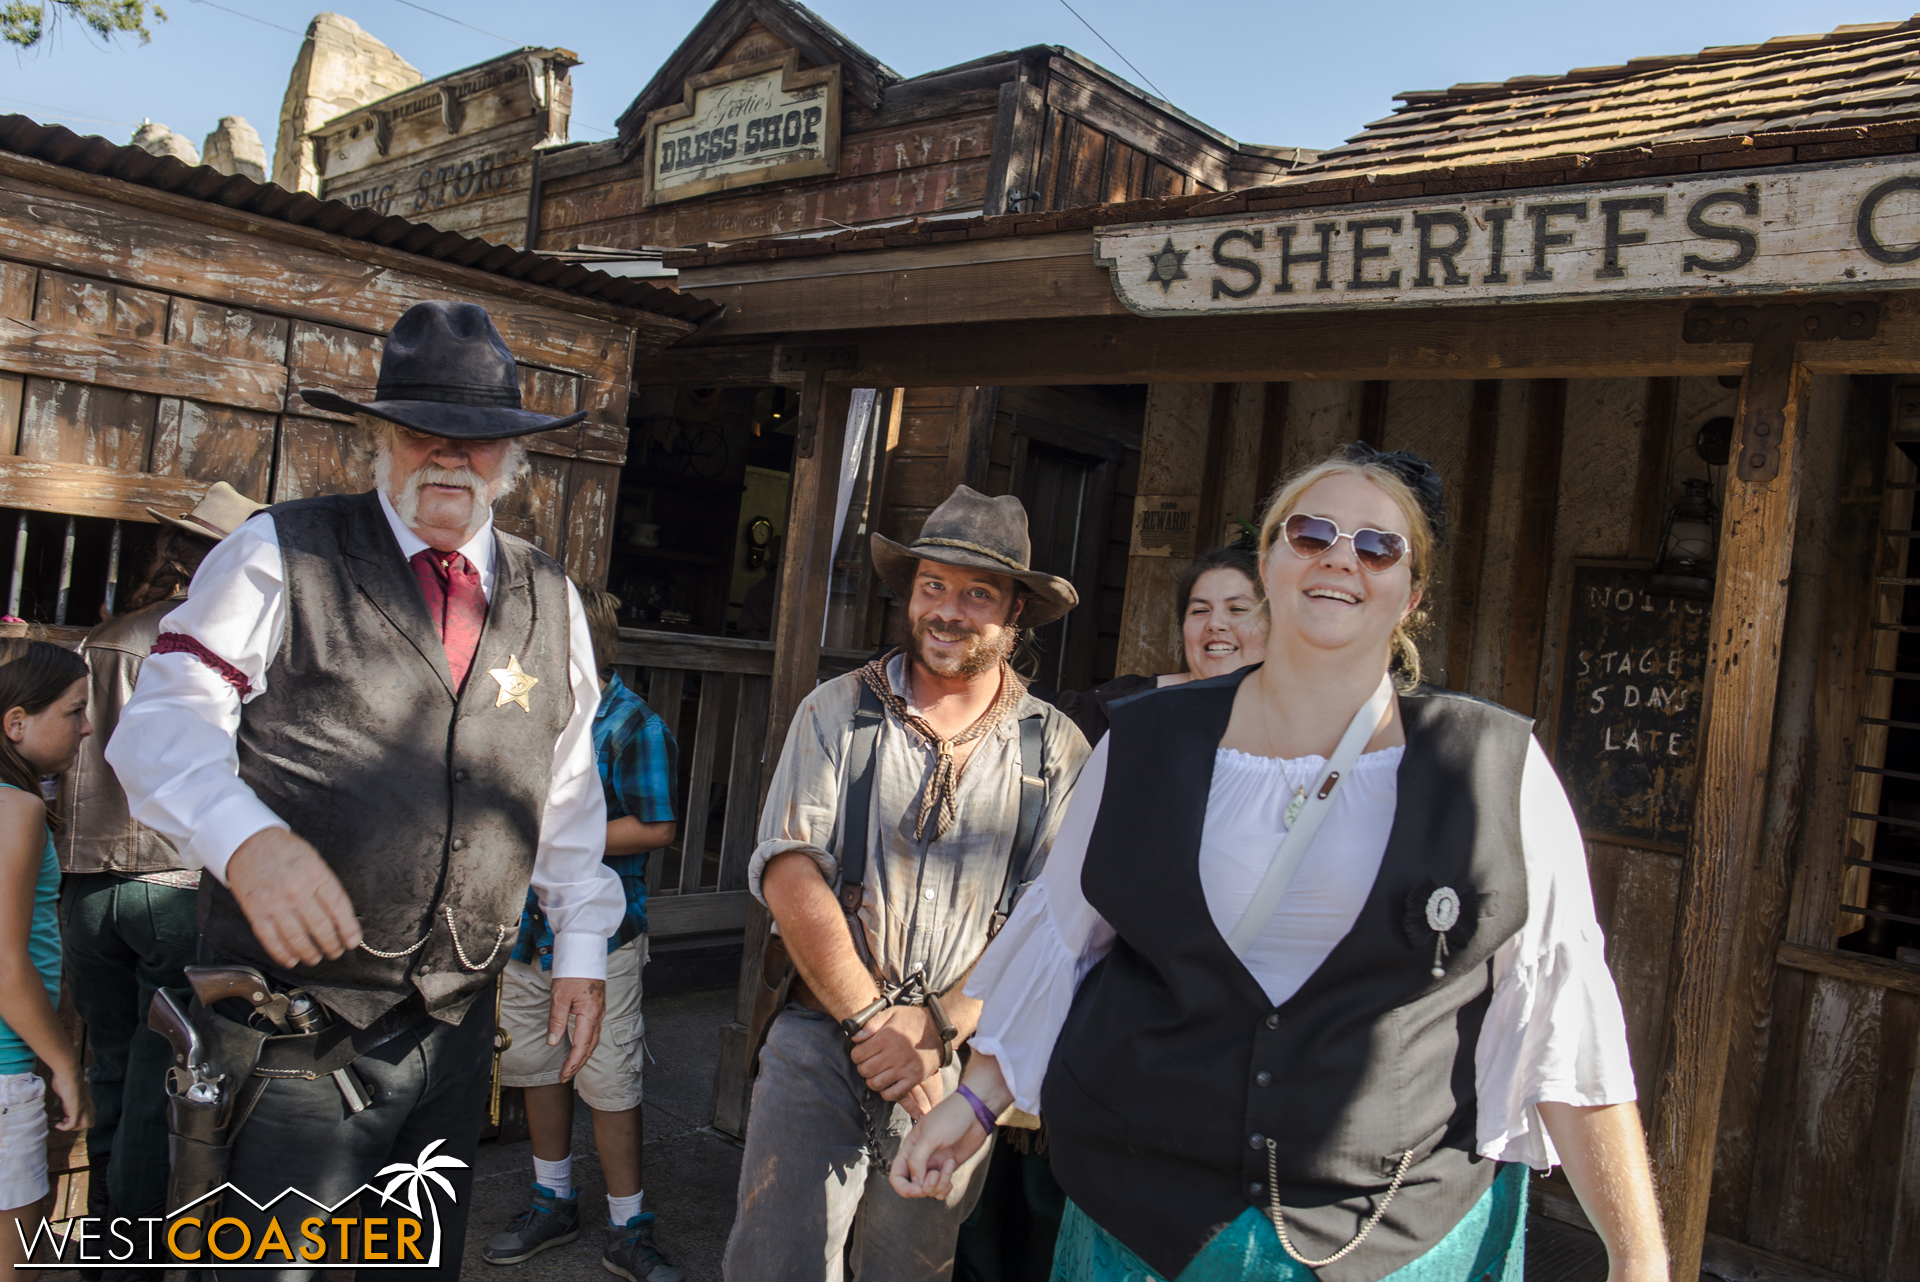  Later in the afternoon, Tiny Mayfield was temporarily released to an honorary citizen deputy and paraded around Calico as an example of the consequences of criminality. 